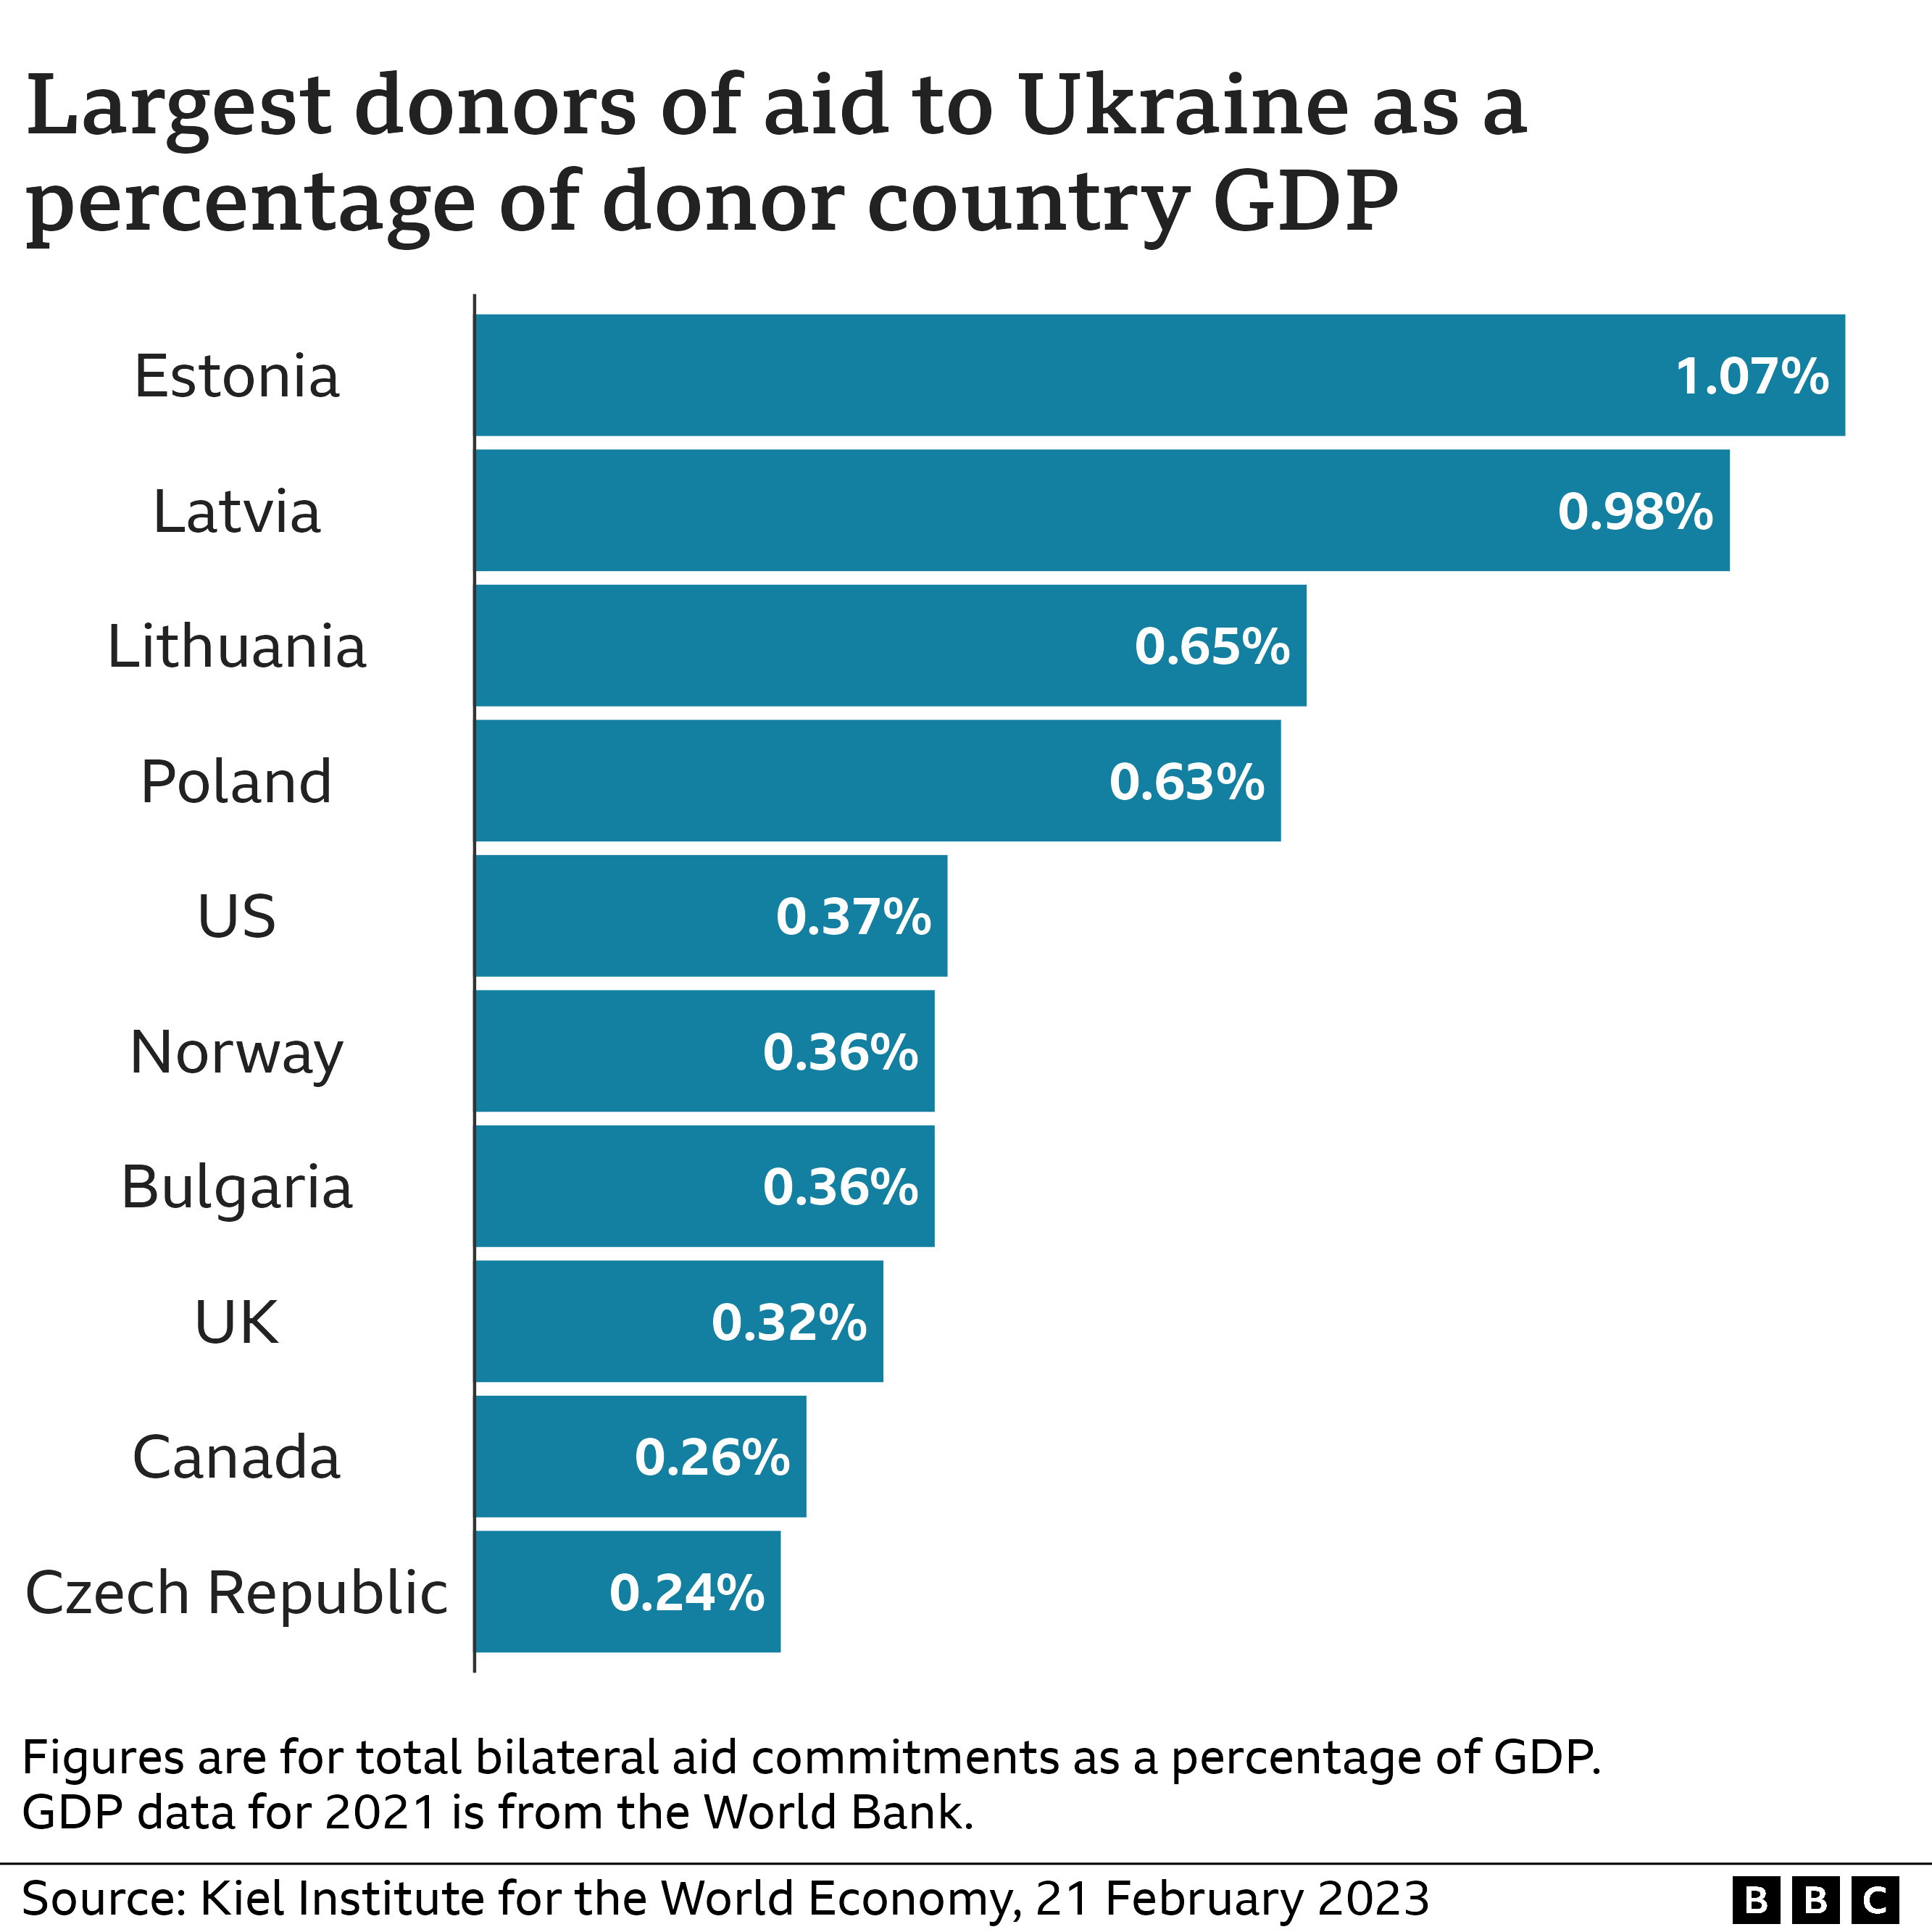 Largest donors of aid to Ukraine as percent of donor country GDP.